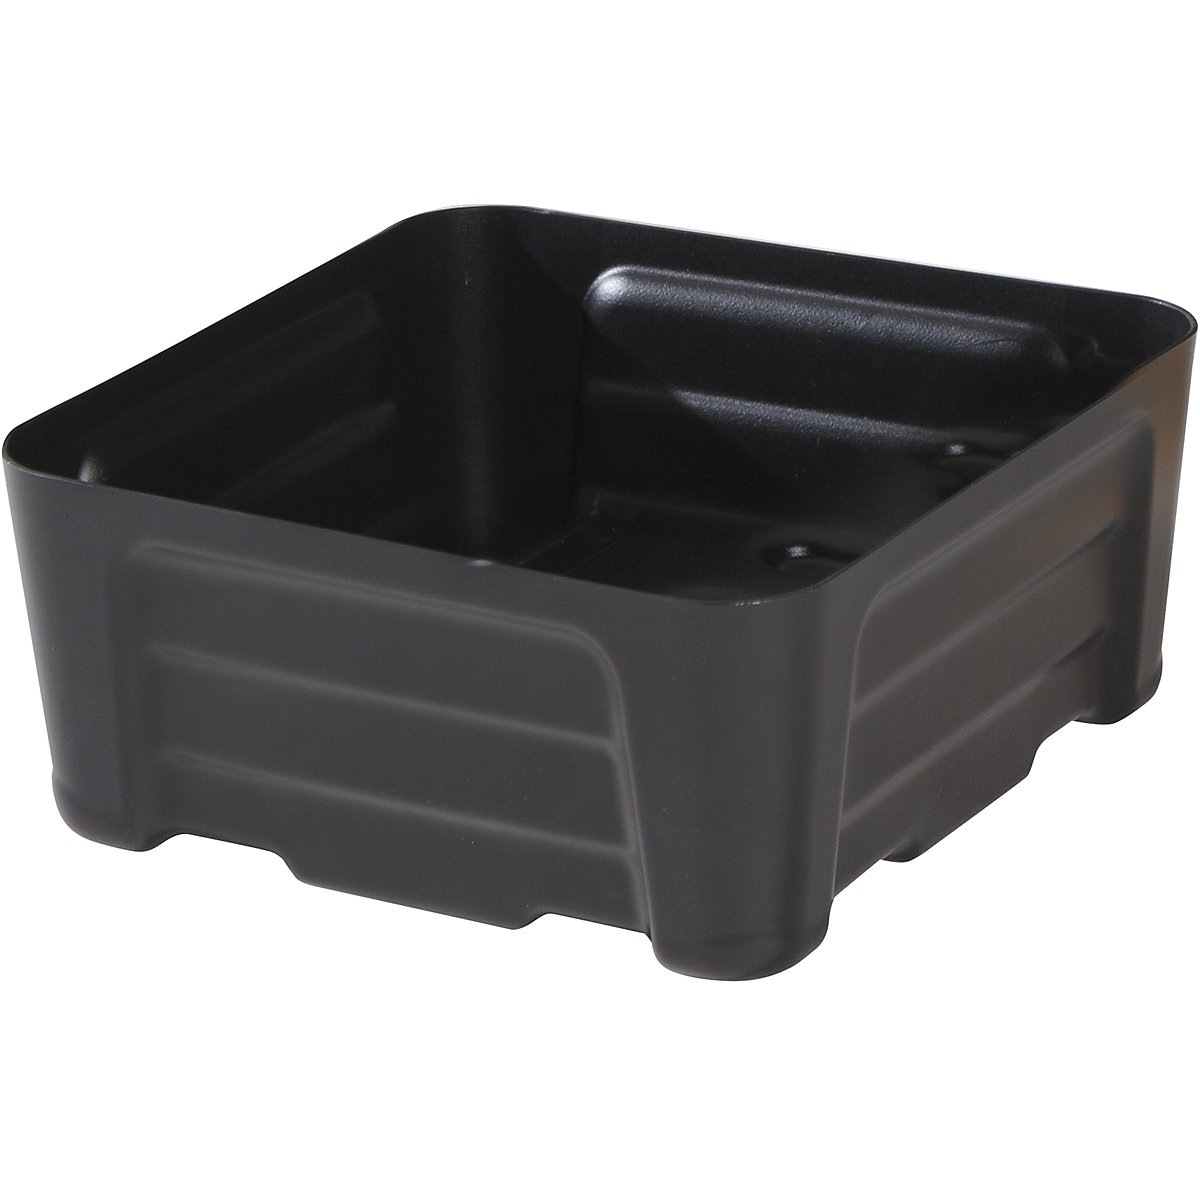 PE sump tray for small containers – eurokraft pro, without grate, collection capacity 20 l-1